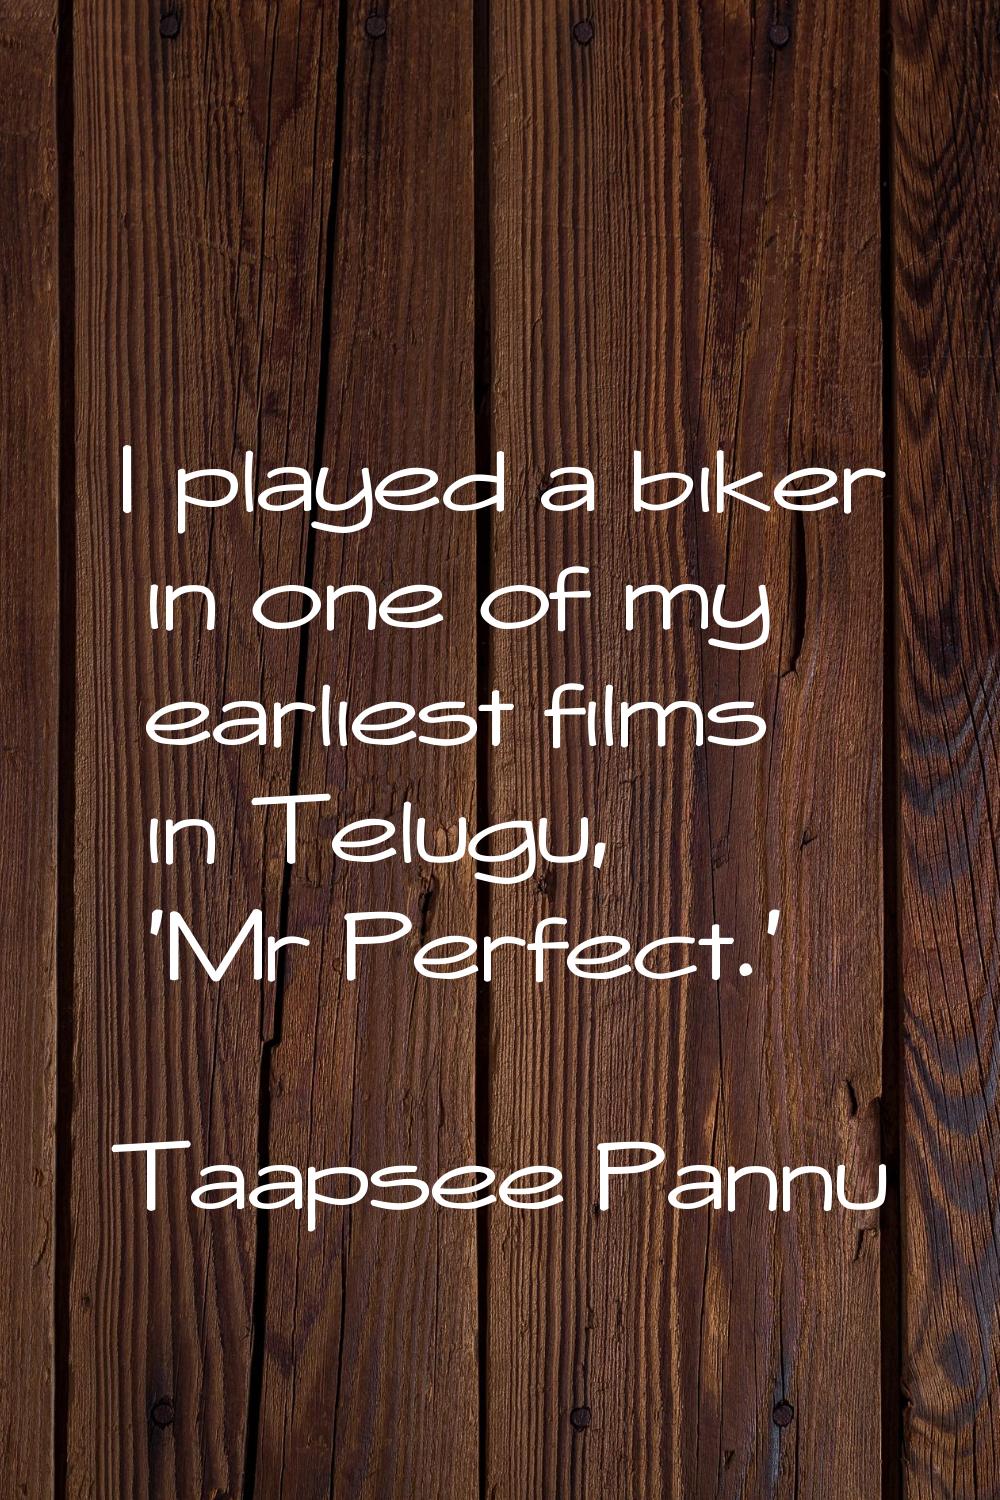 I played a biker in one of my earliest films in Telugu, 'Mr Perfect.'